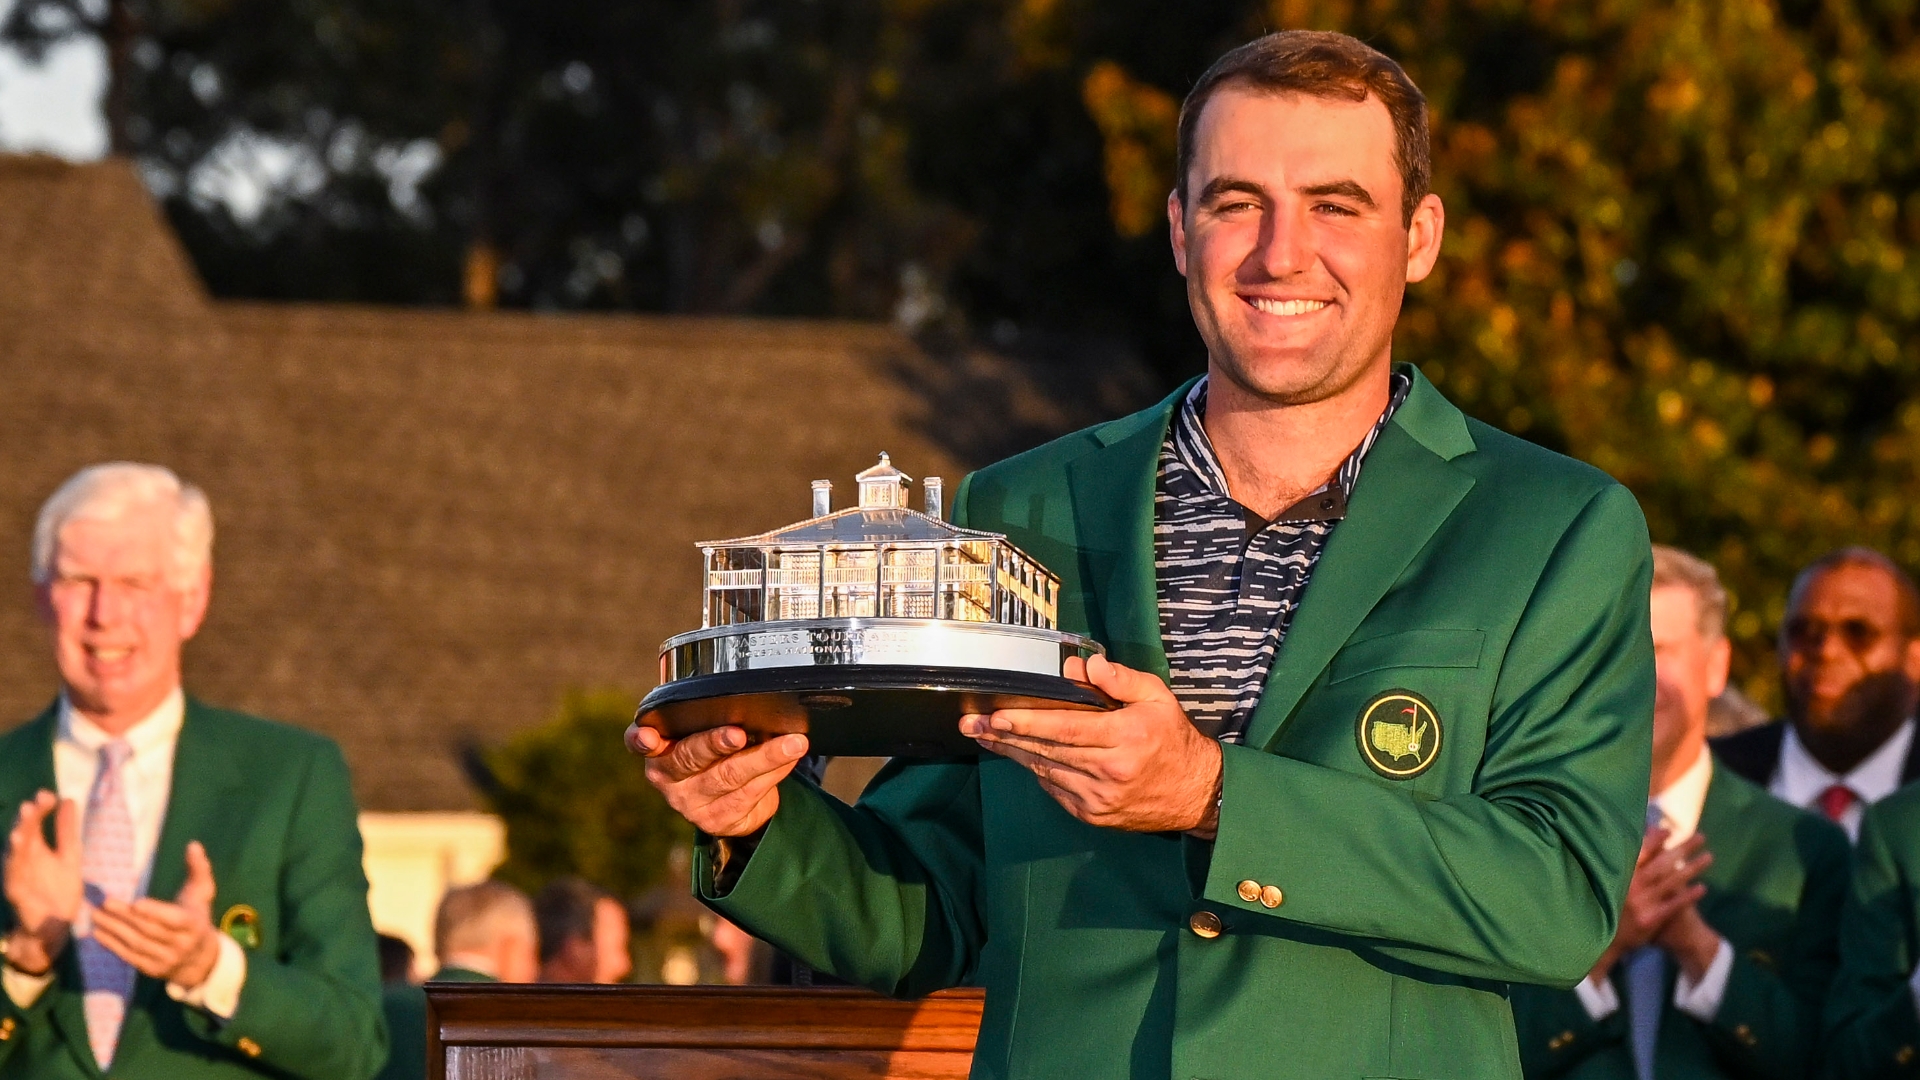 Scheffler takes home the Masters title for his first-career major - Stream the Video